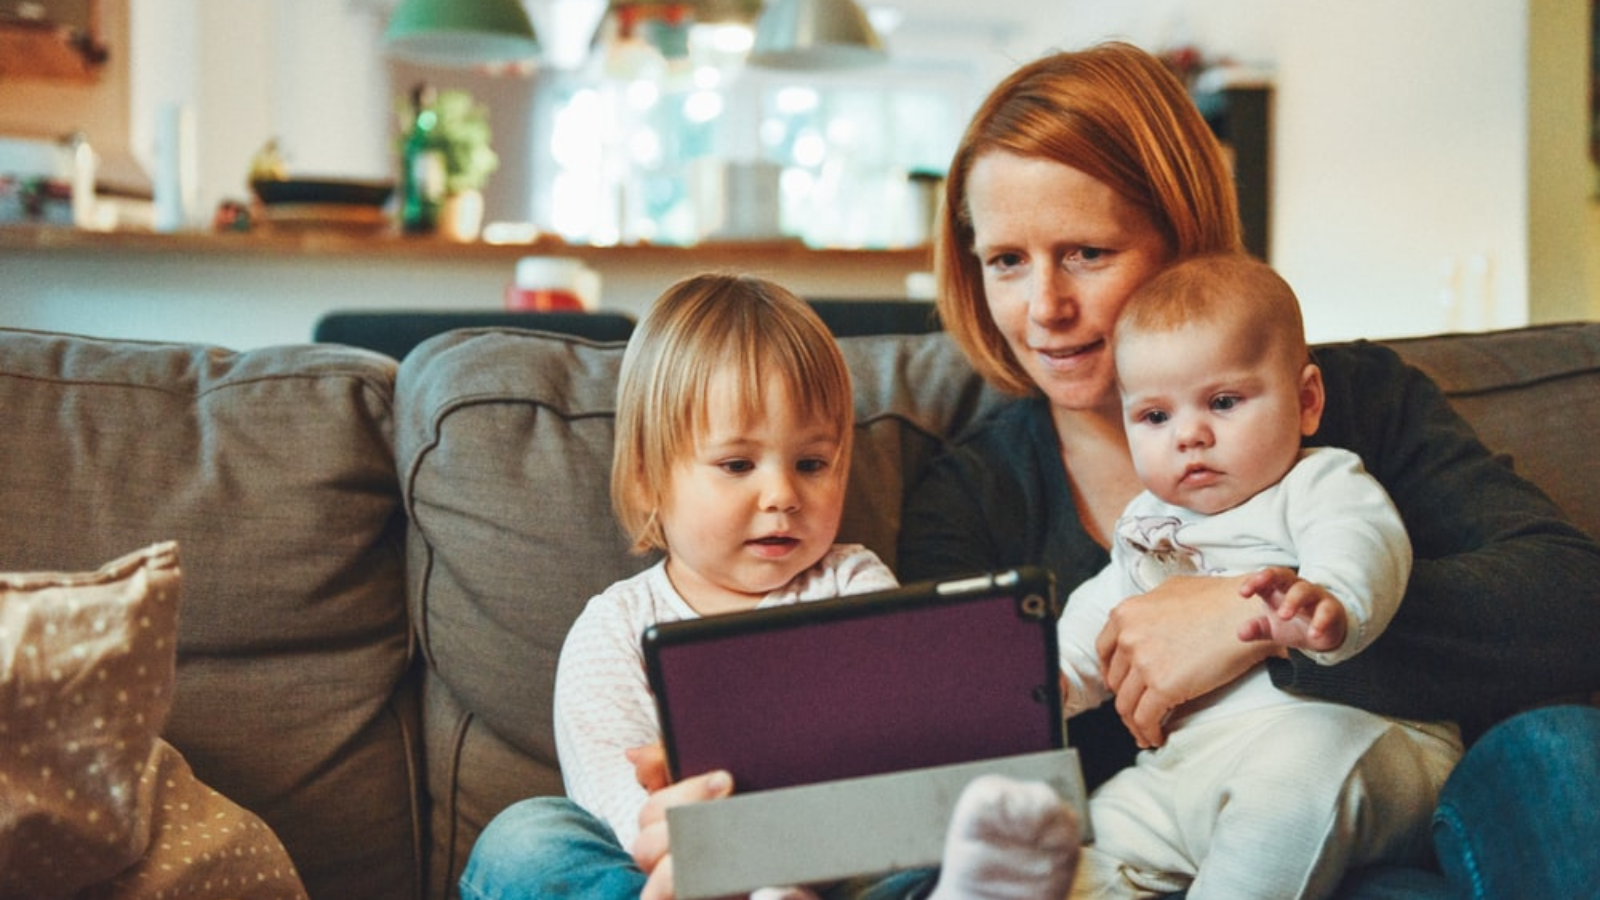 A mom holding her young children while using a tablet